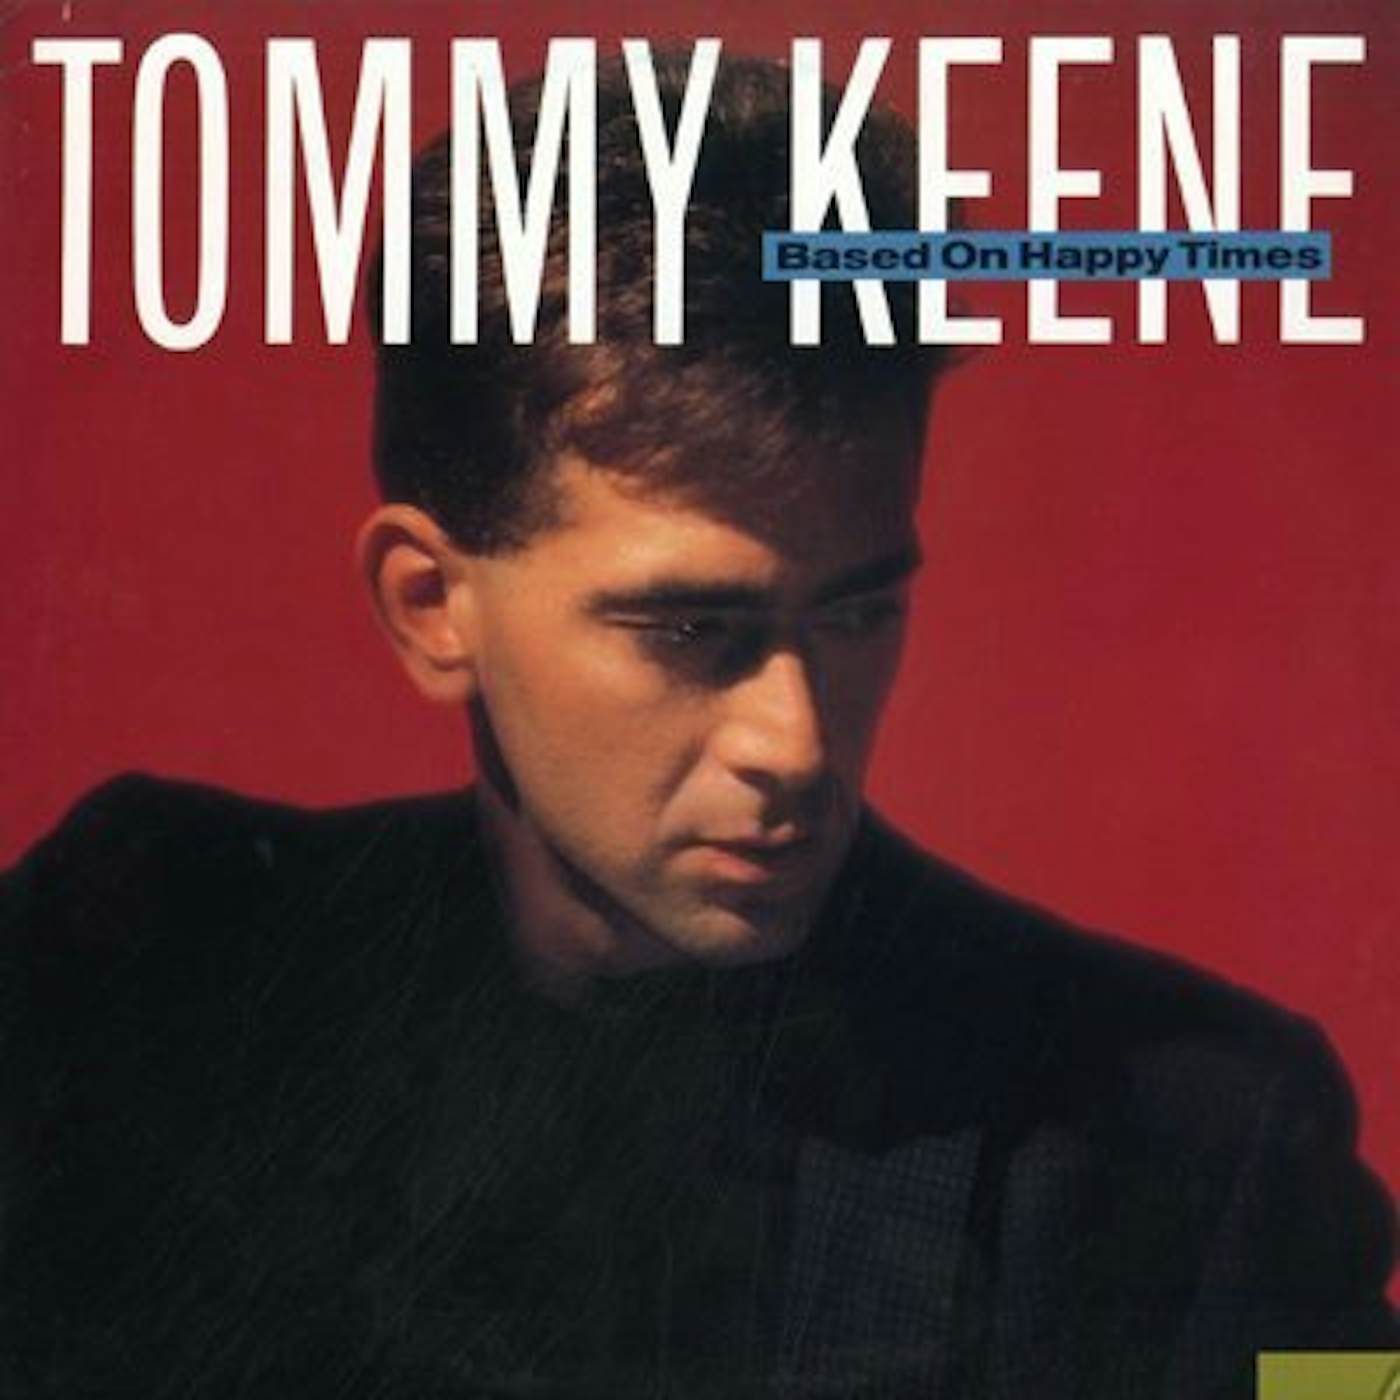 Tommy Keene Based On Happy Times Vinyl Record